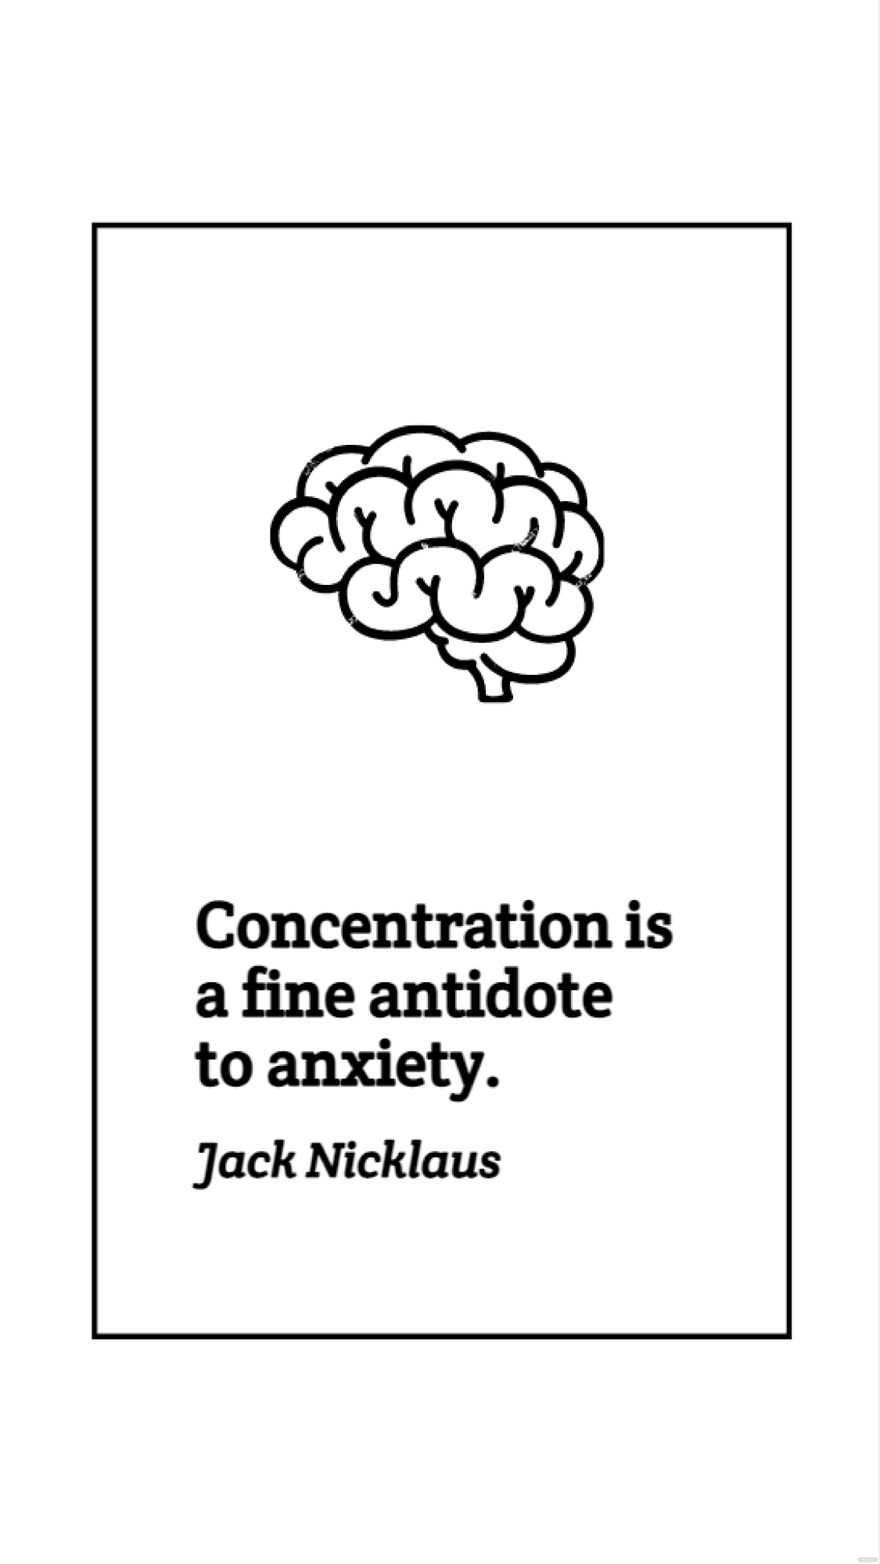 Free Jack Nicklaus - Concentration is a fine antidote to anxiety. in JPG